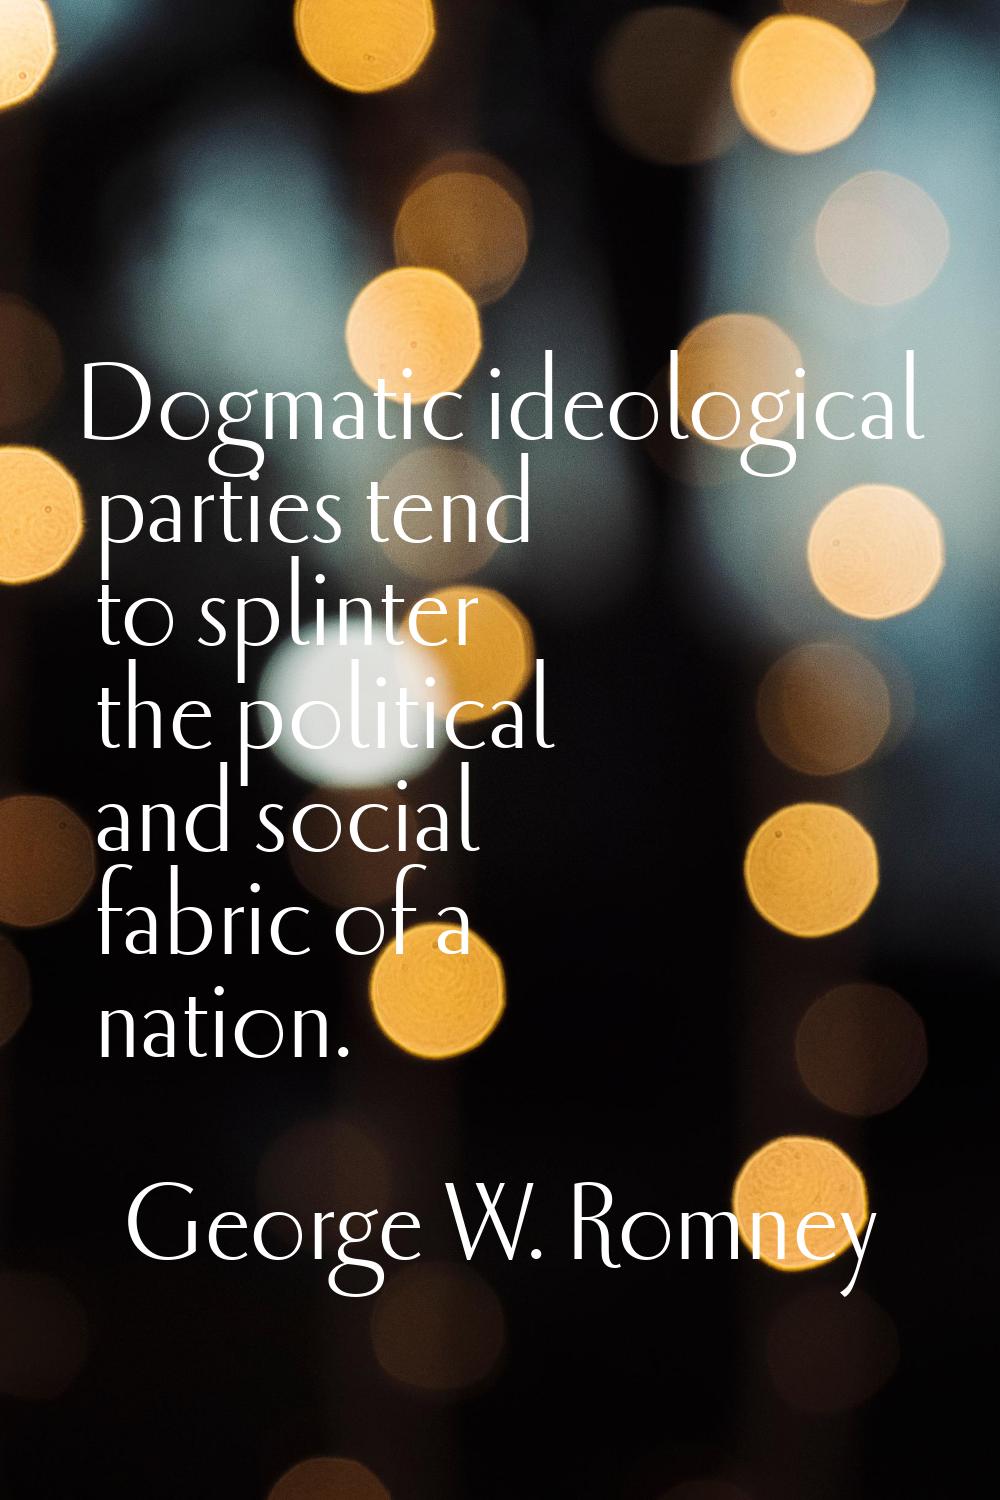 Dogmatic ideological parties tend to splinter the political and social fabric of a nation.